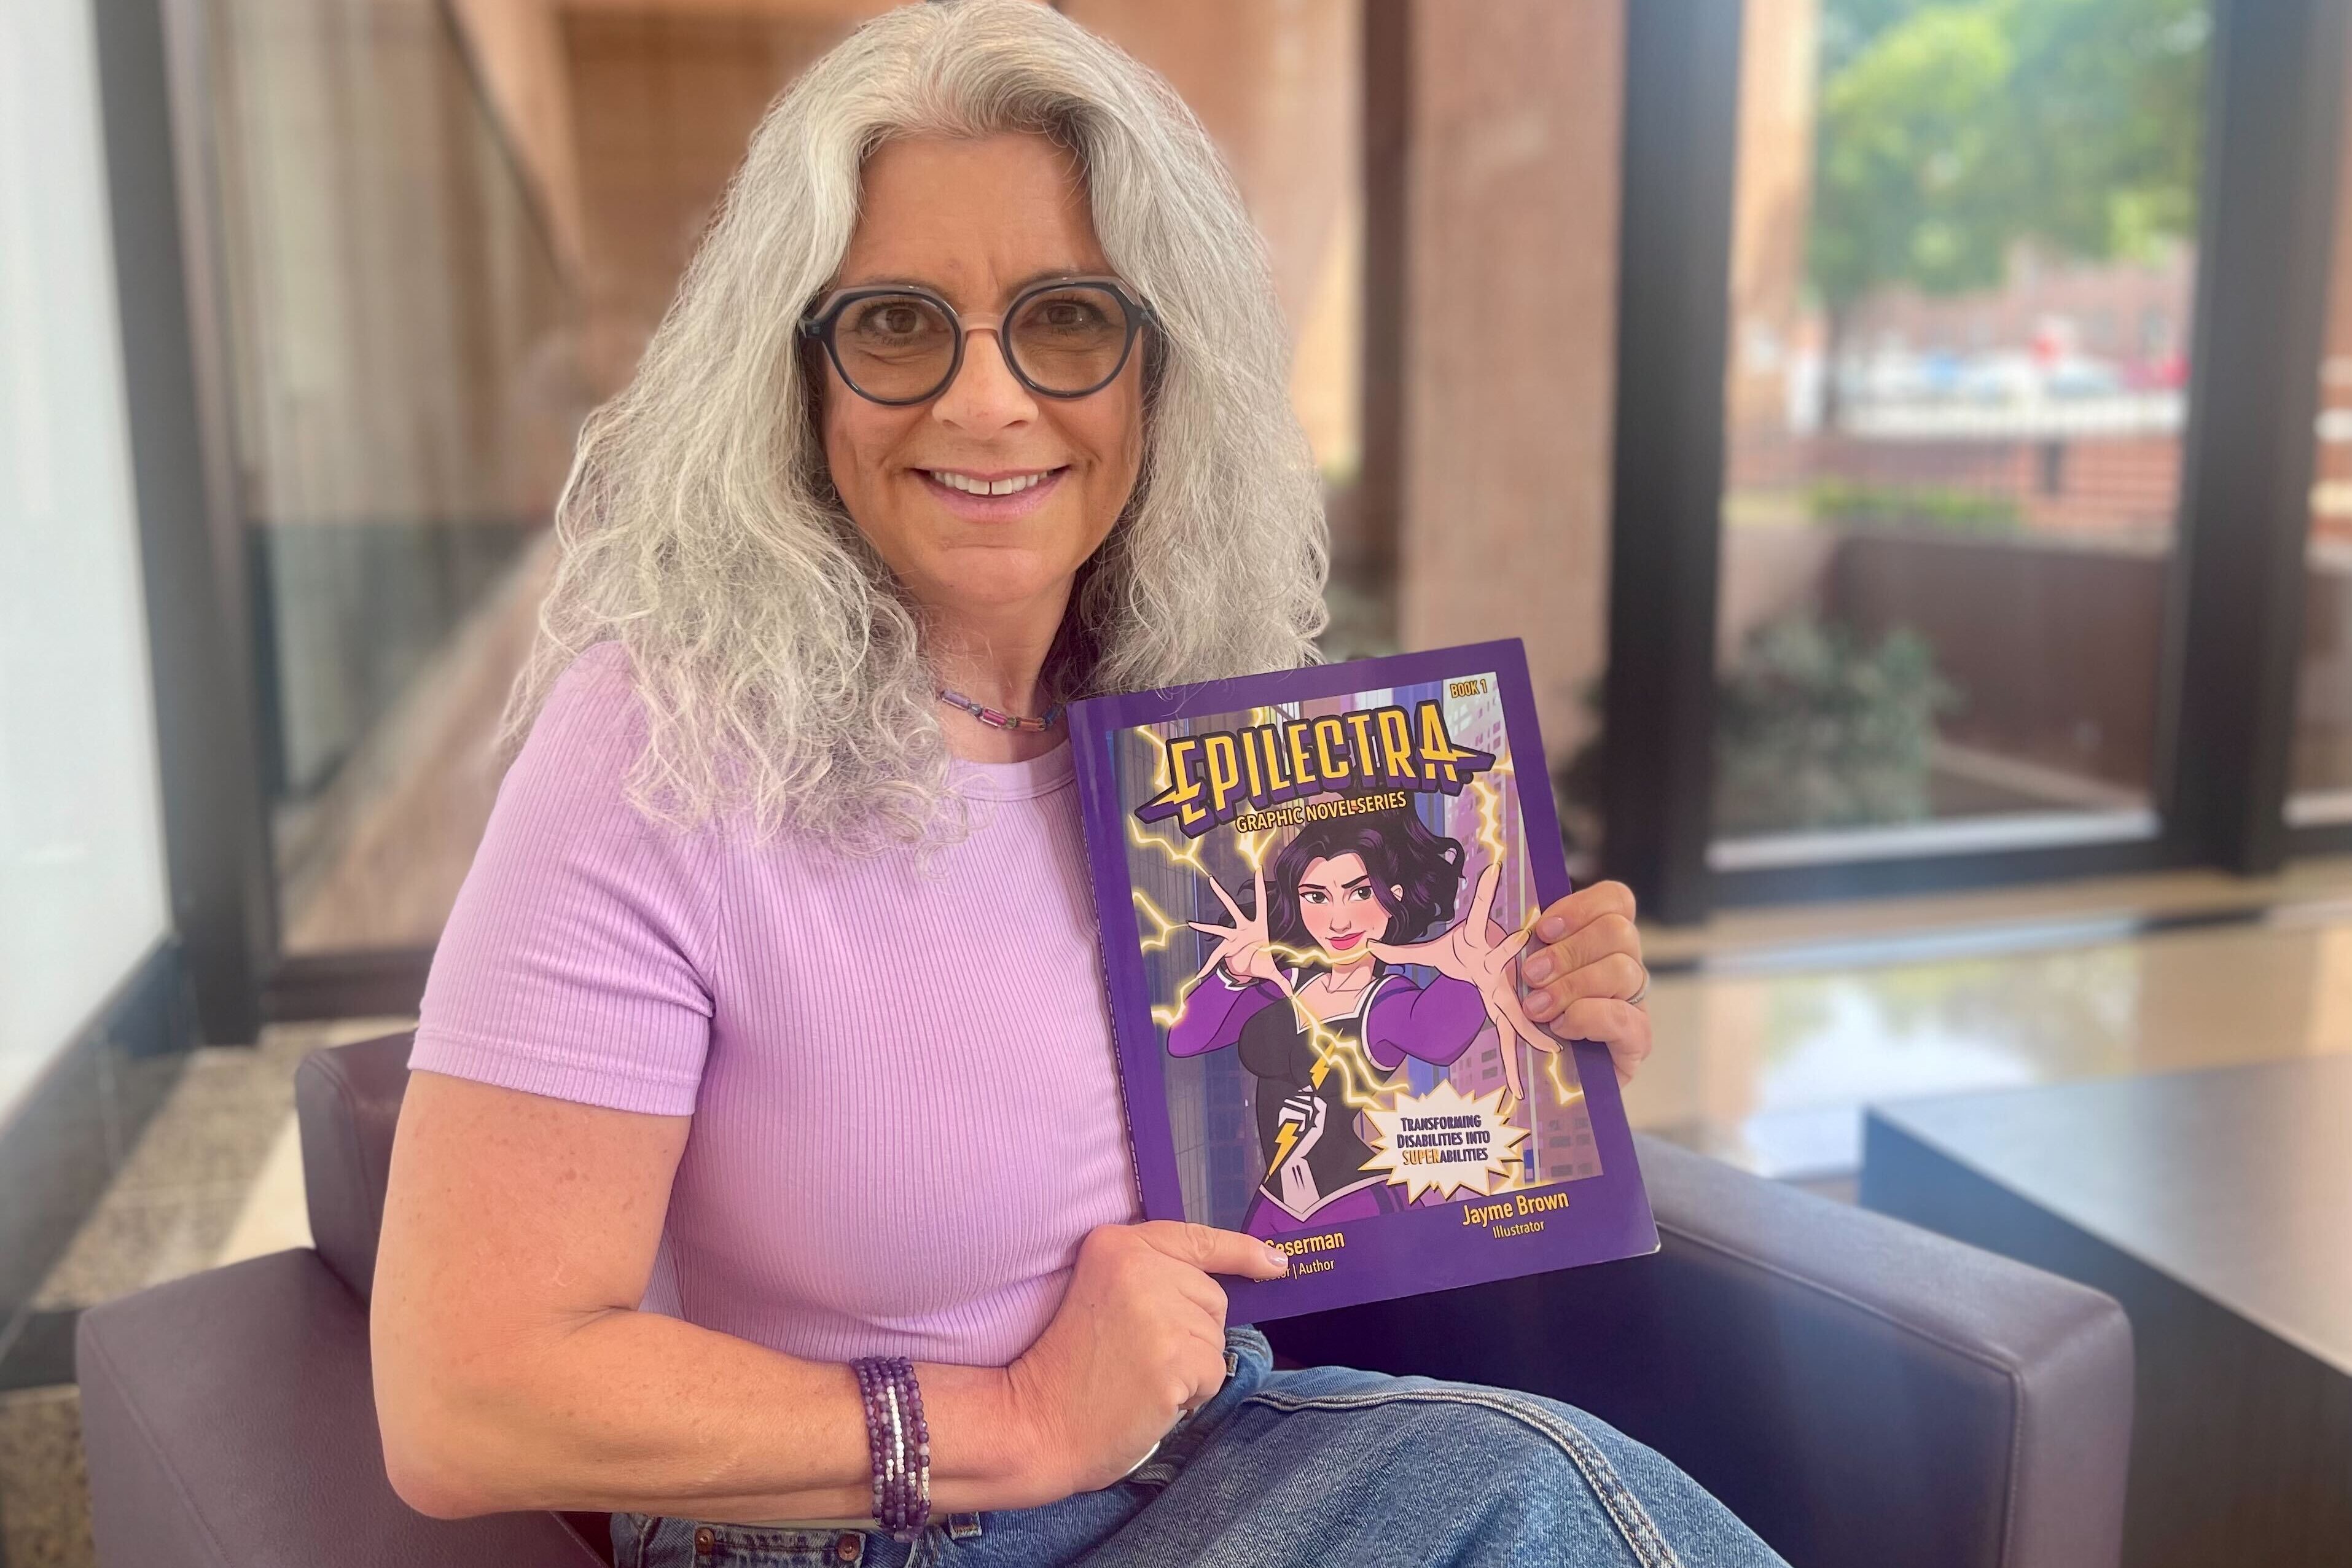 A woman with white shoulder-length hair and a purple shirt holds up a comic book to her chest.